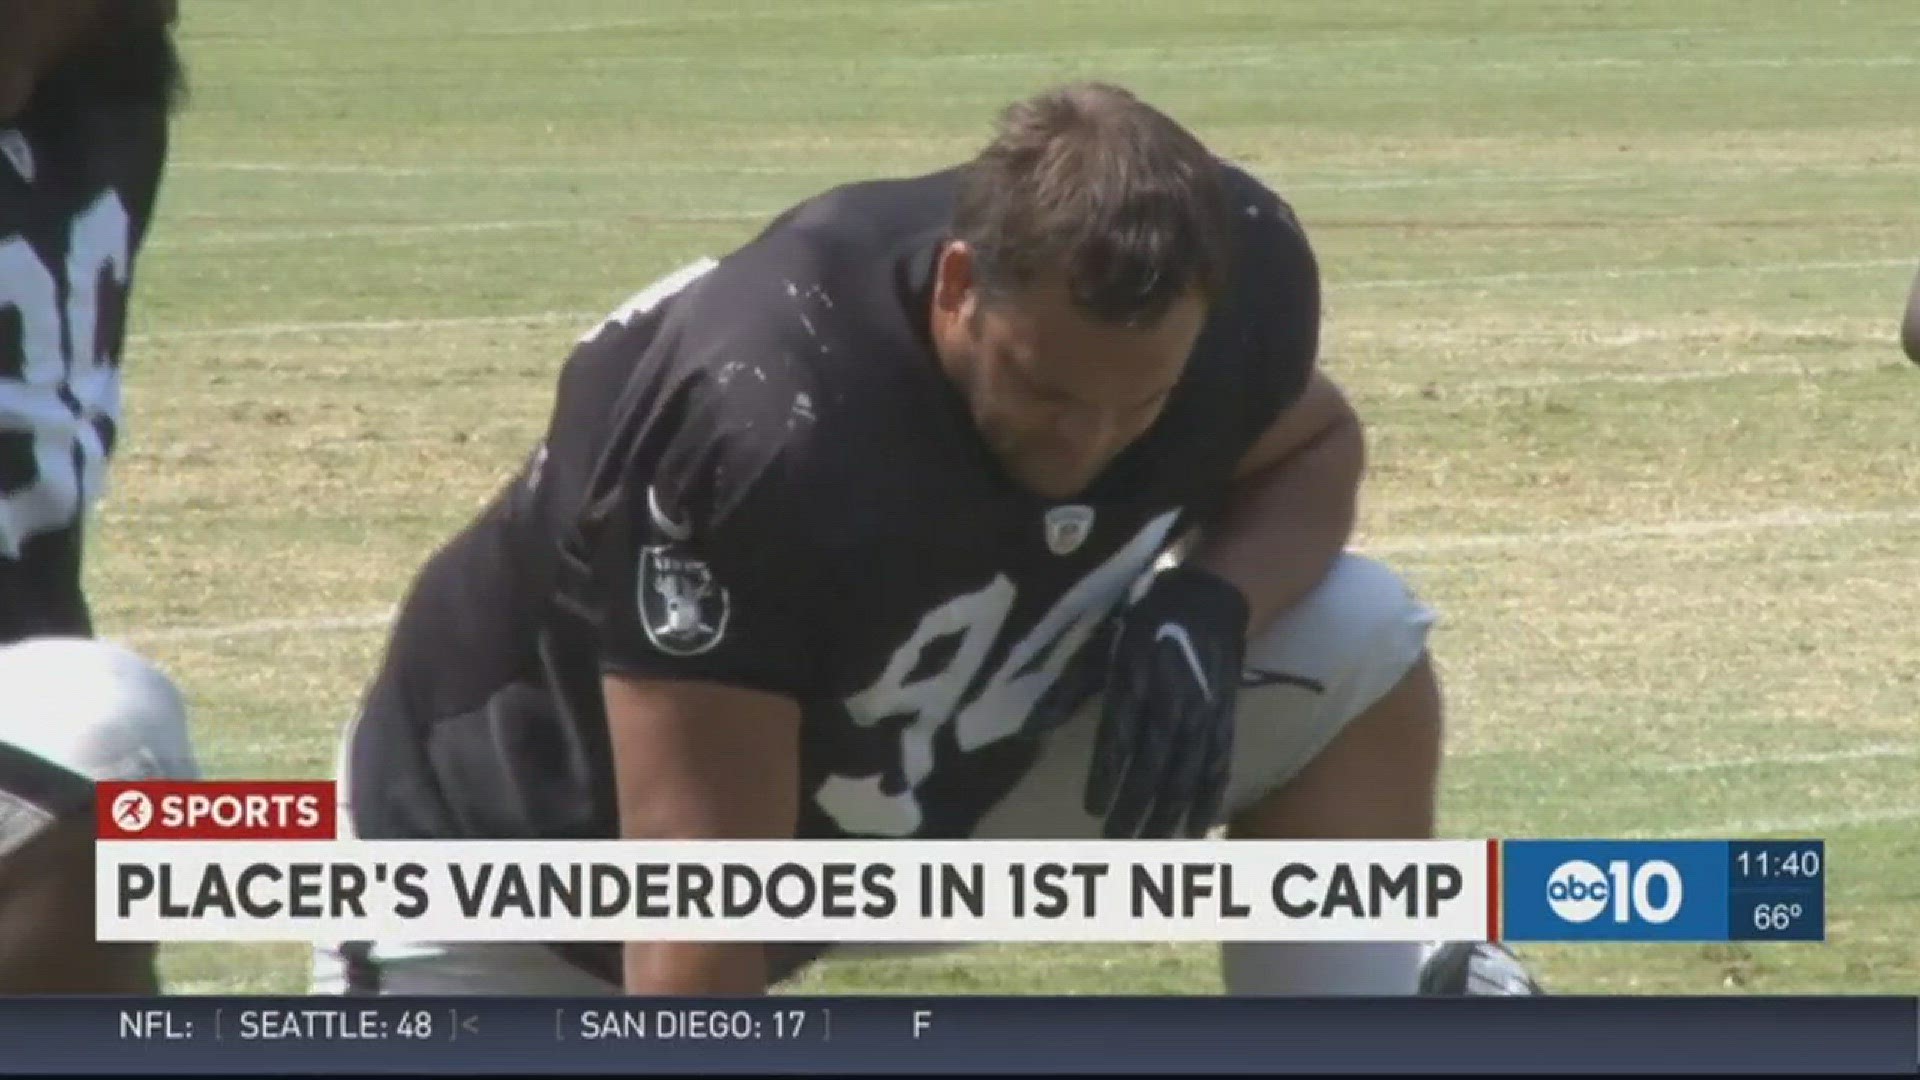 Oakland Raiders' rookie defensive tackle Eddie Vanderdoes, an Auburn native who attended Placer High School, talks to ABC10's Pierre Noujaim about his firs training camp in Napa with his new NFL team and what the experience has been like as they prepare f